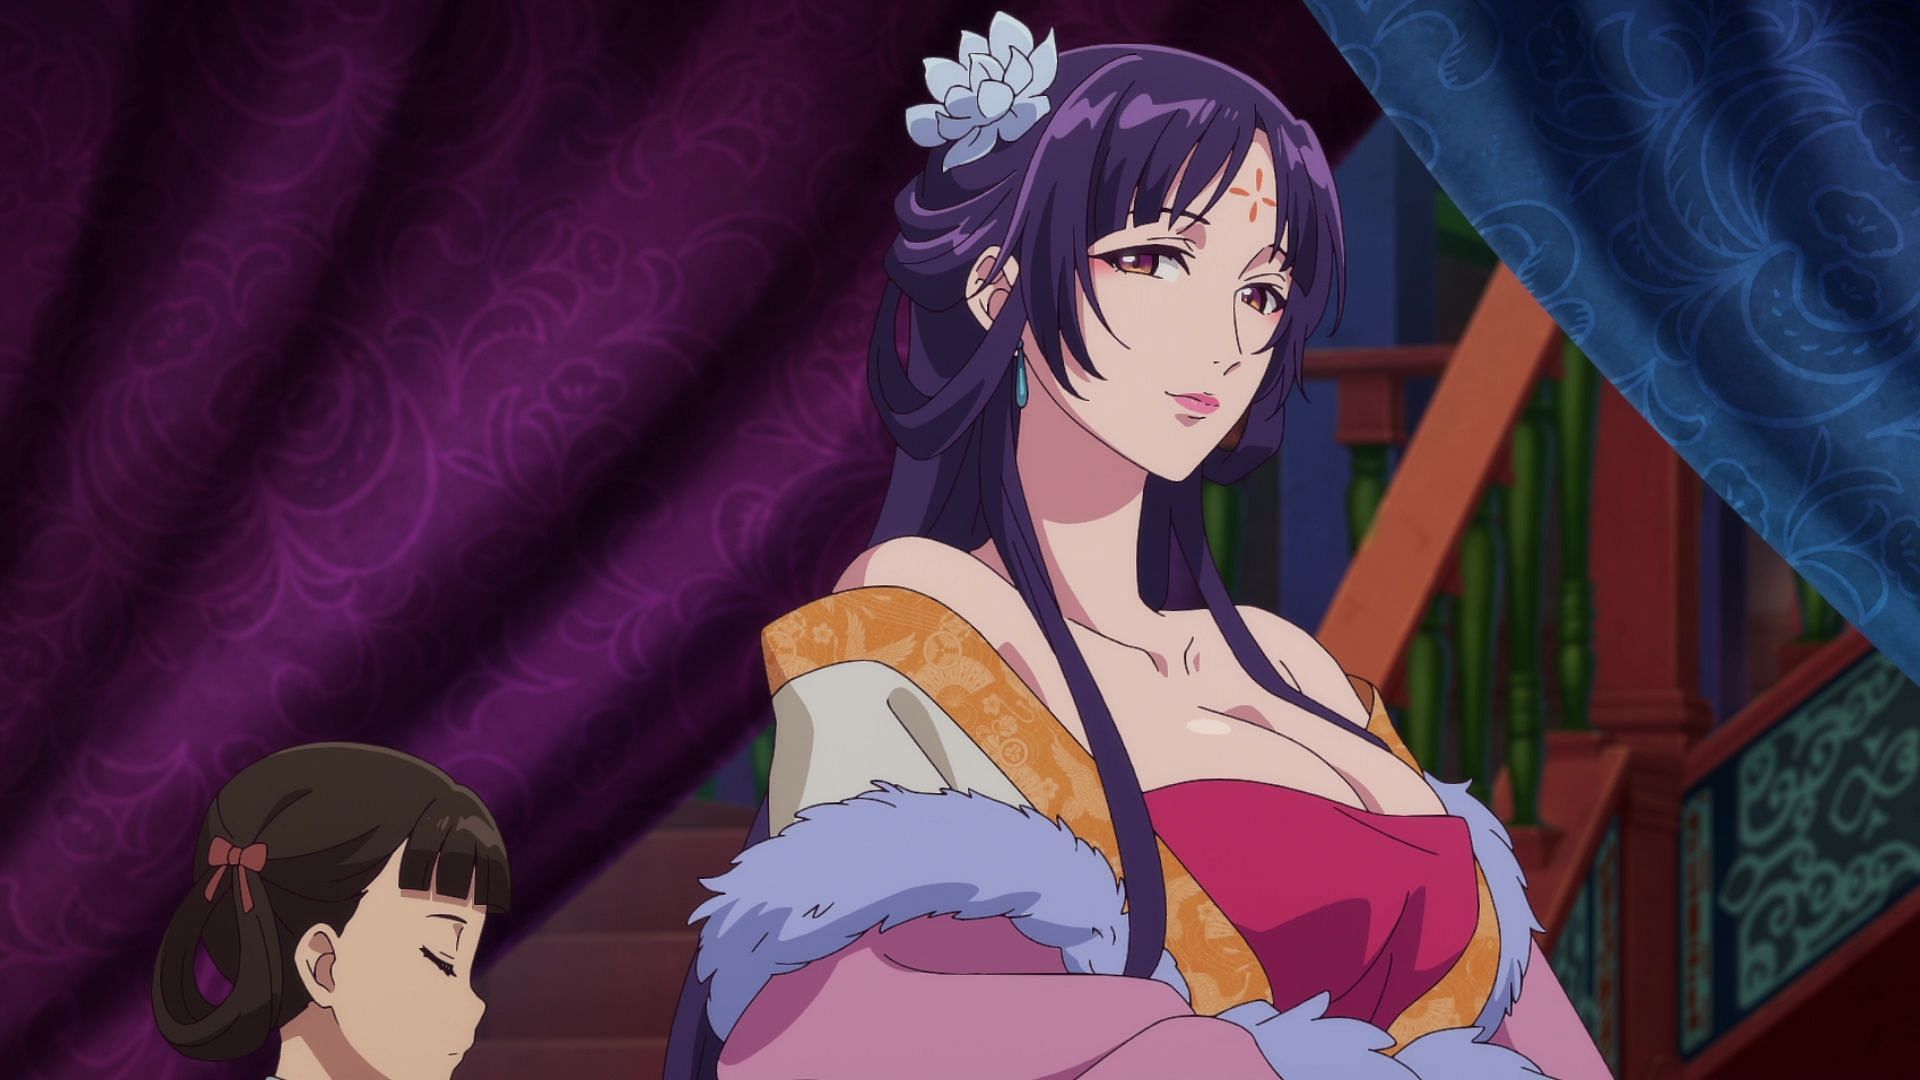 An image of a concubine shown in the anime series (Image via OLM and TOHO Animation)